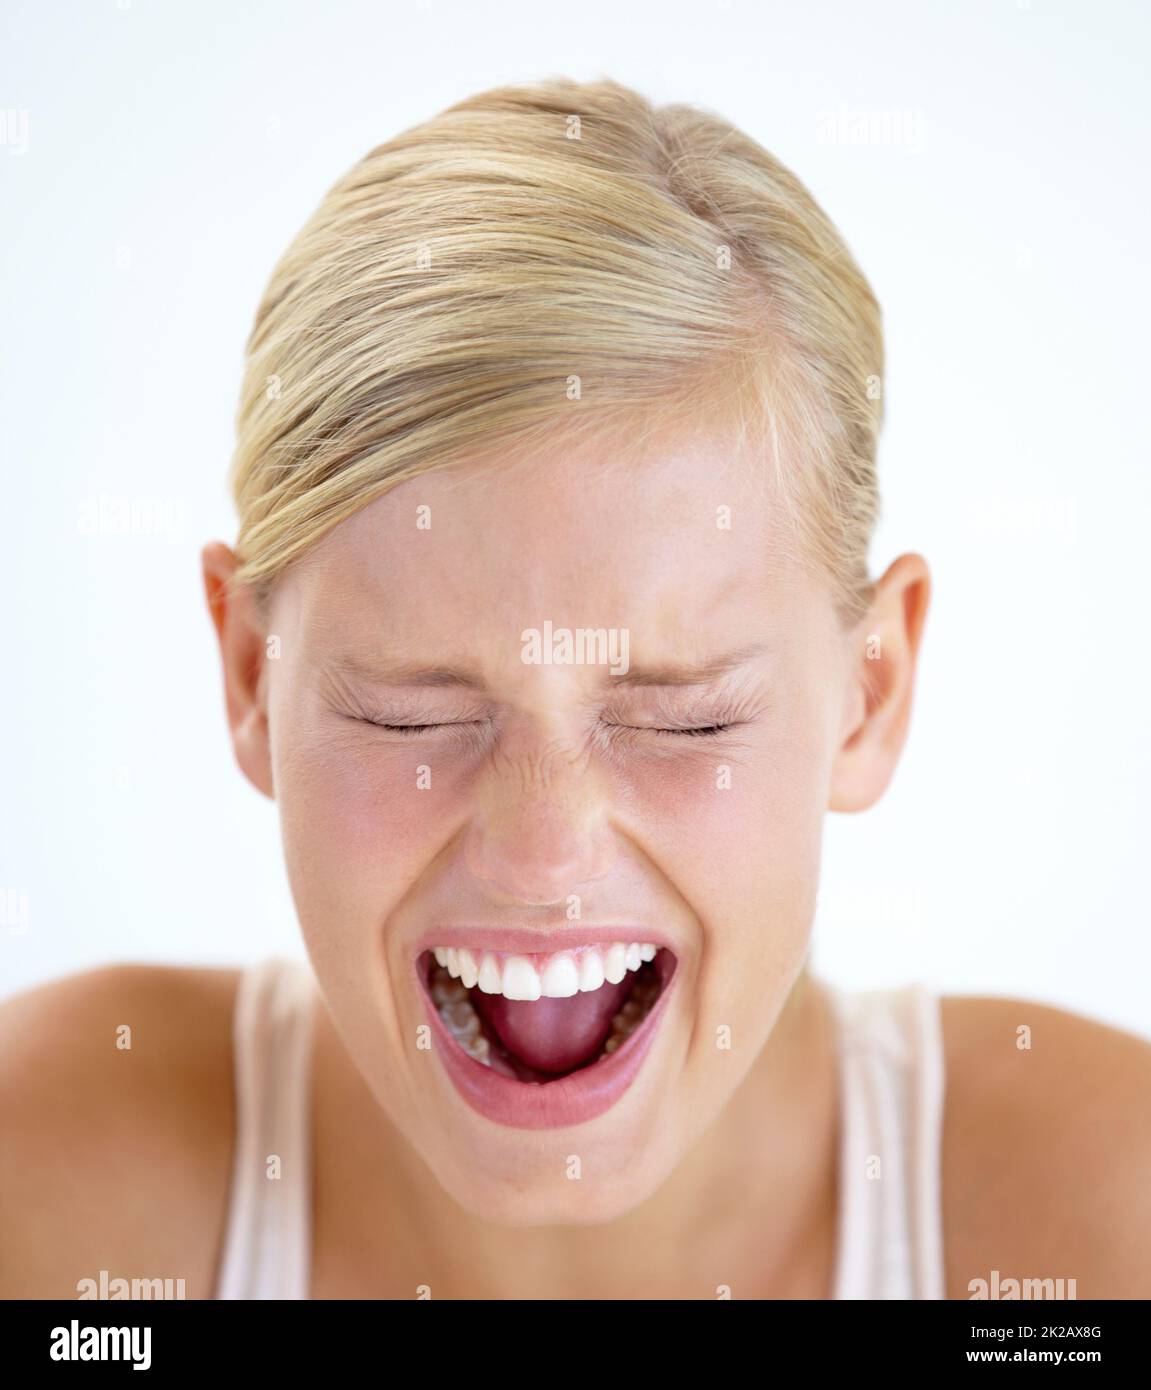 Venting her emotions. A frightened young woman shrieking with her eyes closed. Stock Photo